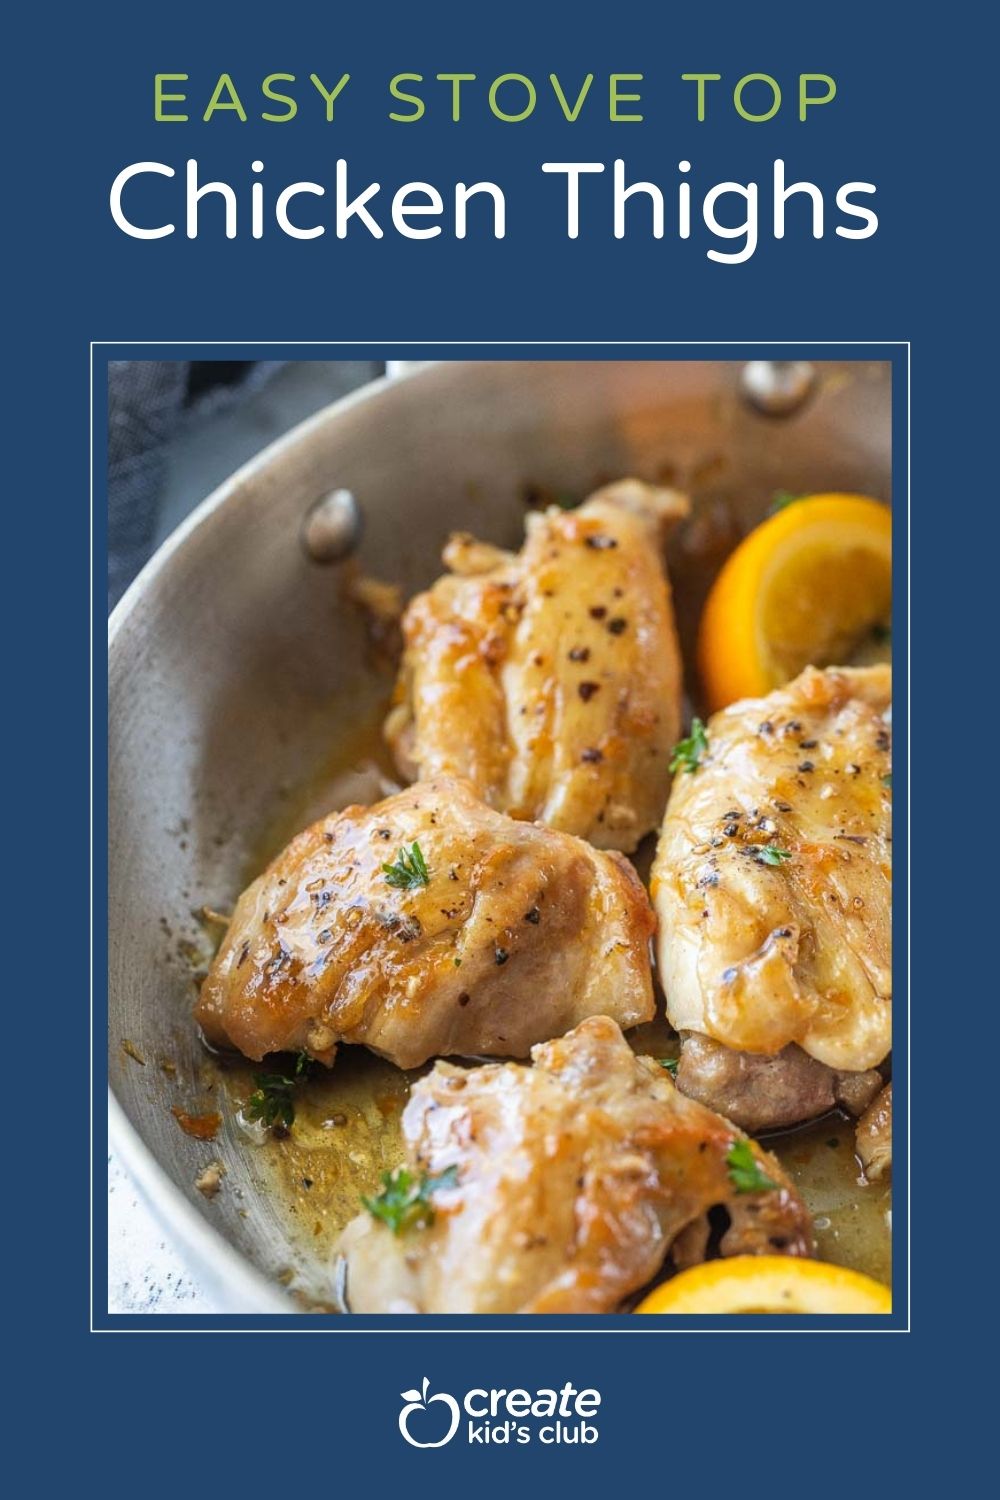 pin of stove top chicken thighs in a skillet